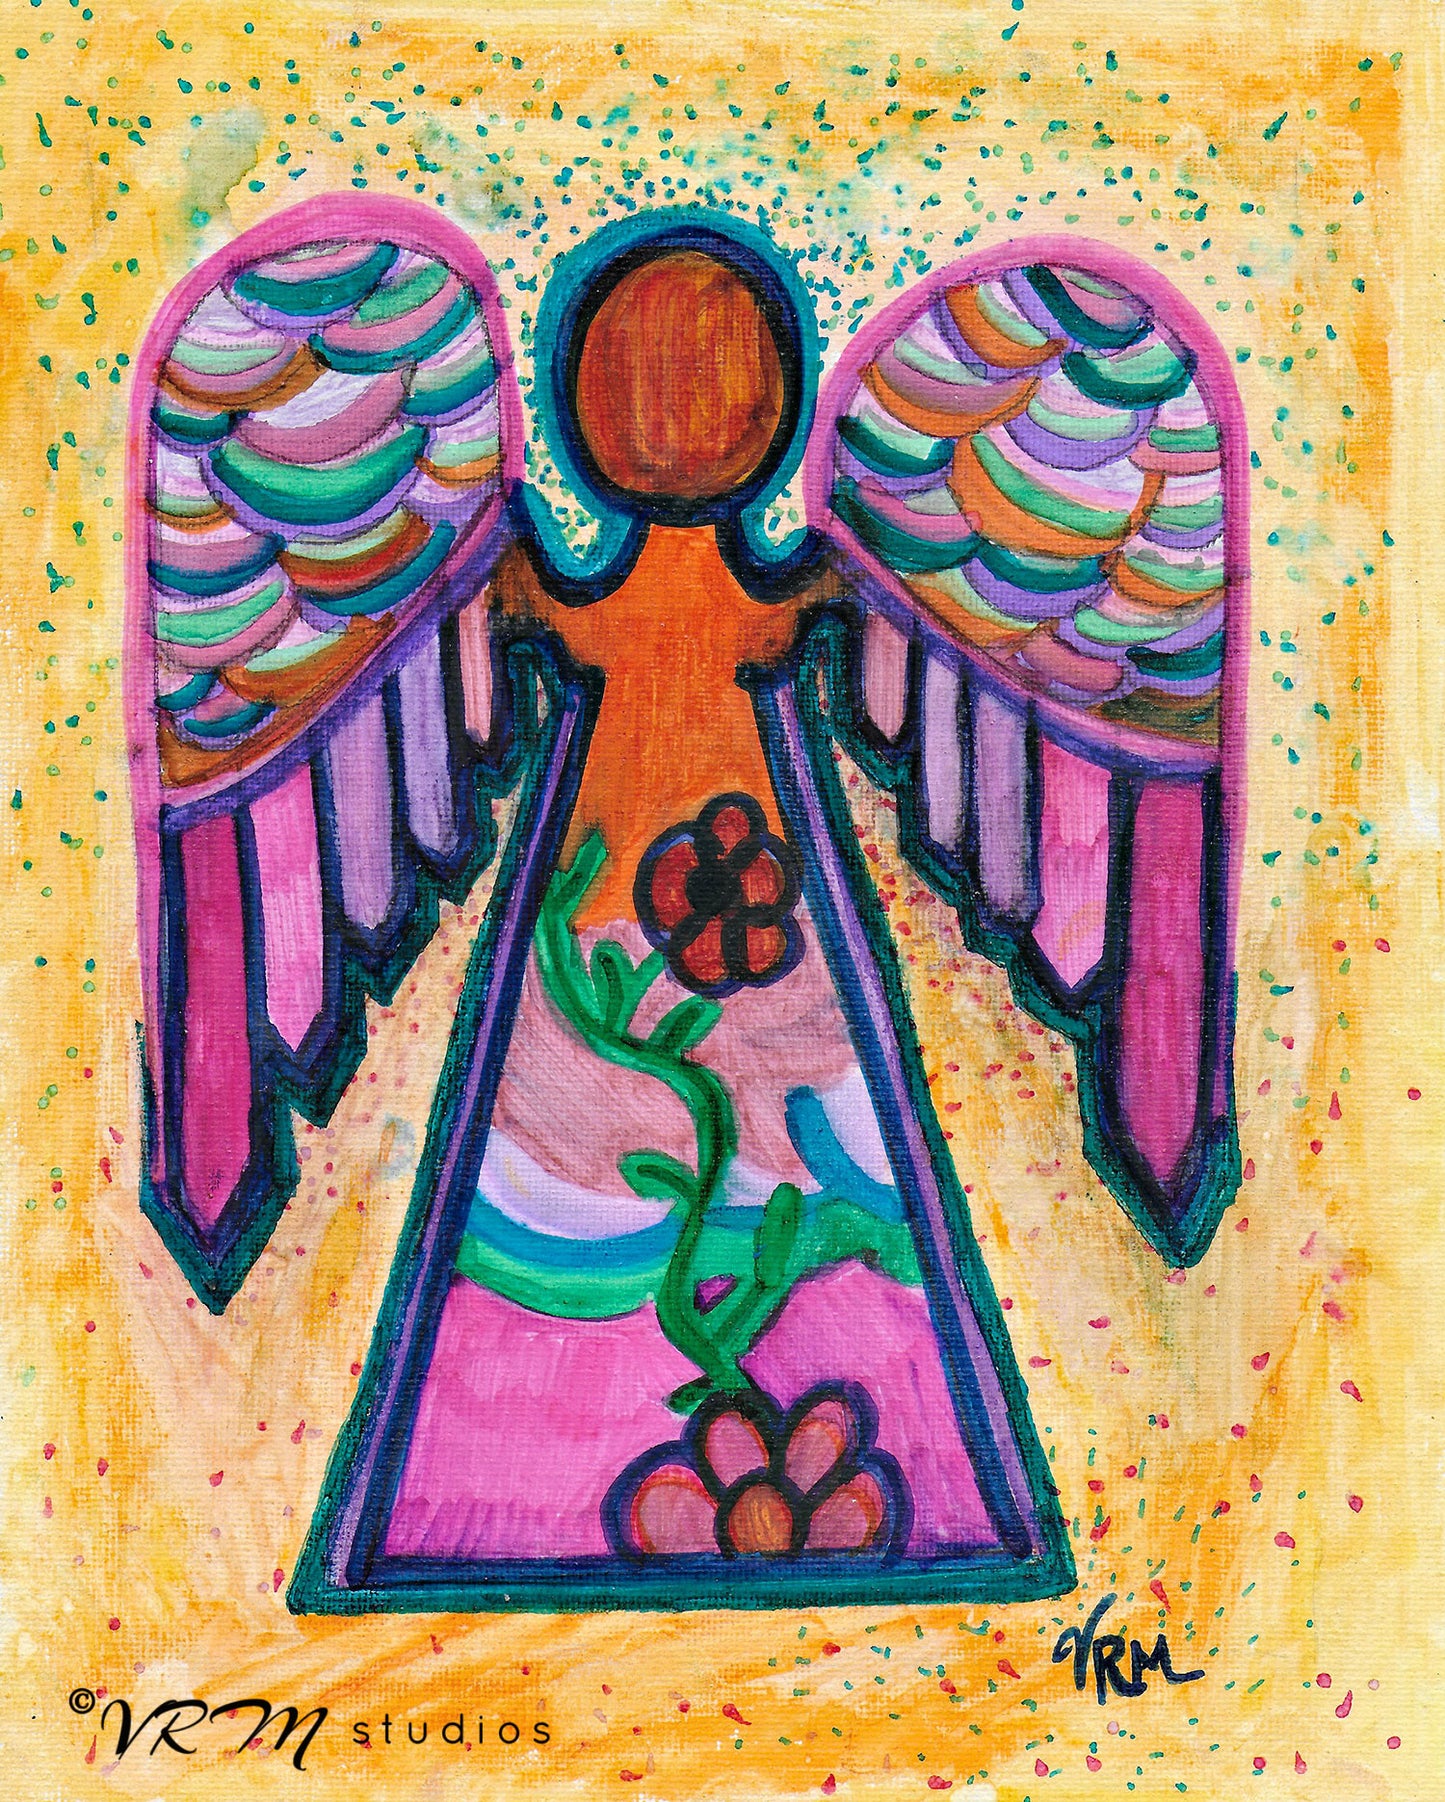 Annie Angel, original angel folk art painting on canvas sheet, matted, 11x14 inches